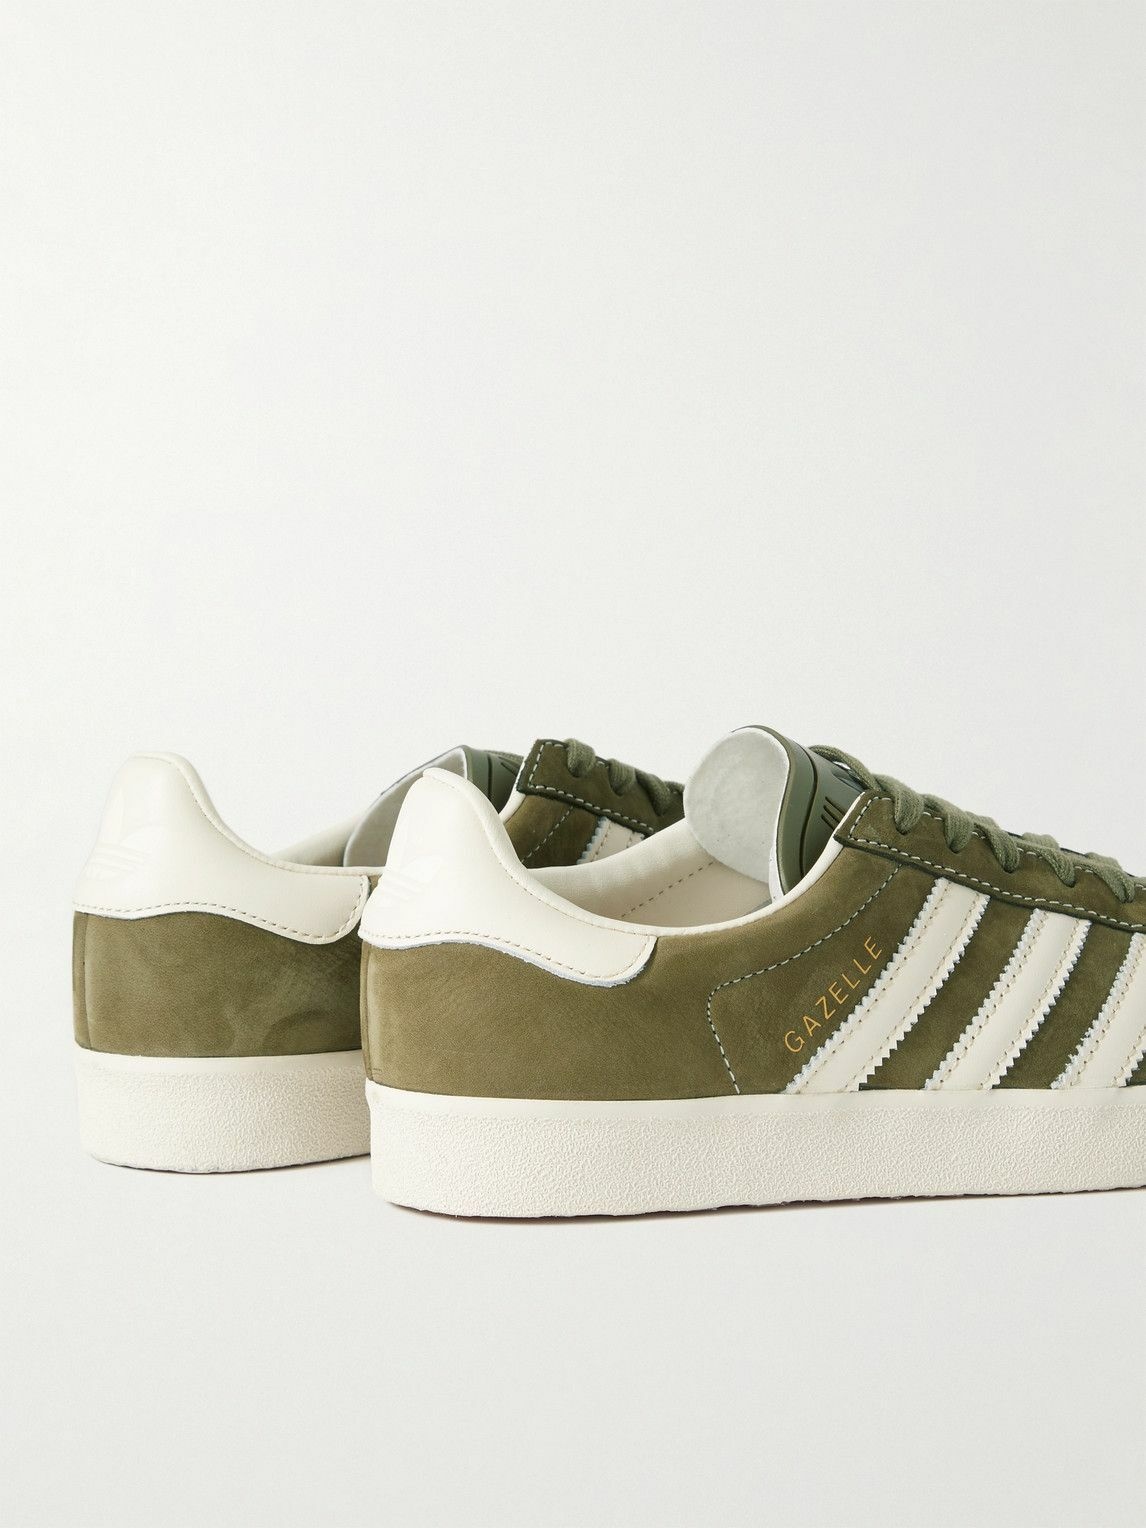 Adidas superstar orbit green suede leather sneakers in Mumbai | Clasf  fashion